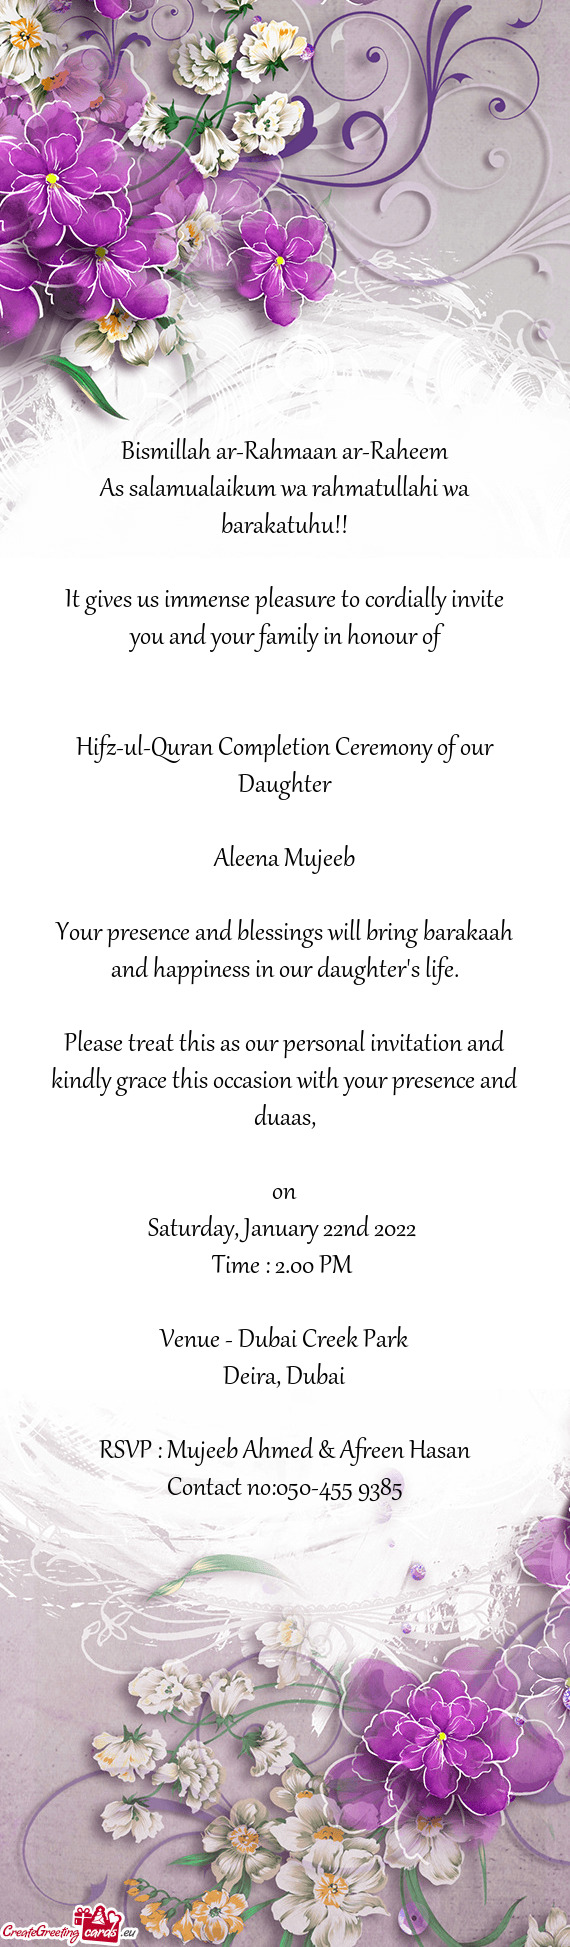 Hifz-ul-Quran Completion Ceremony of our Daughter